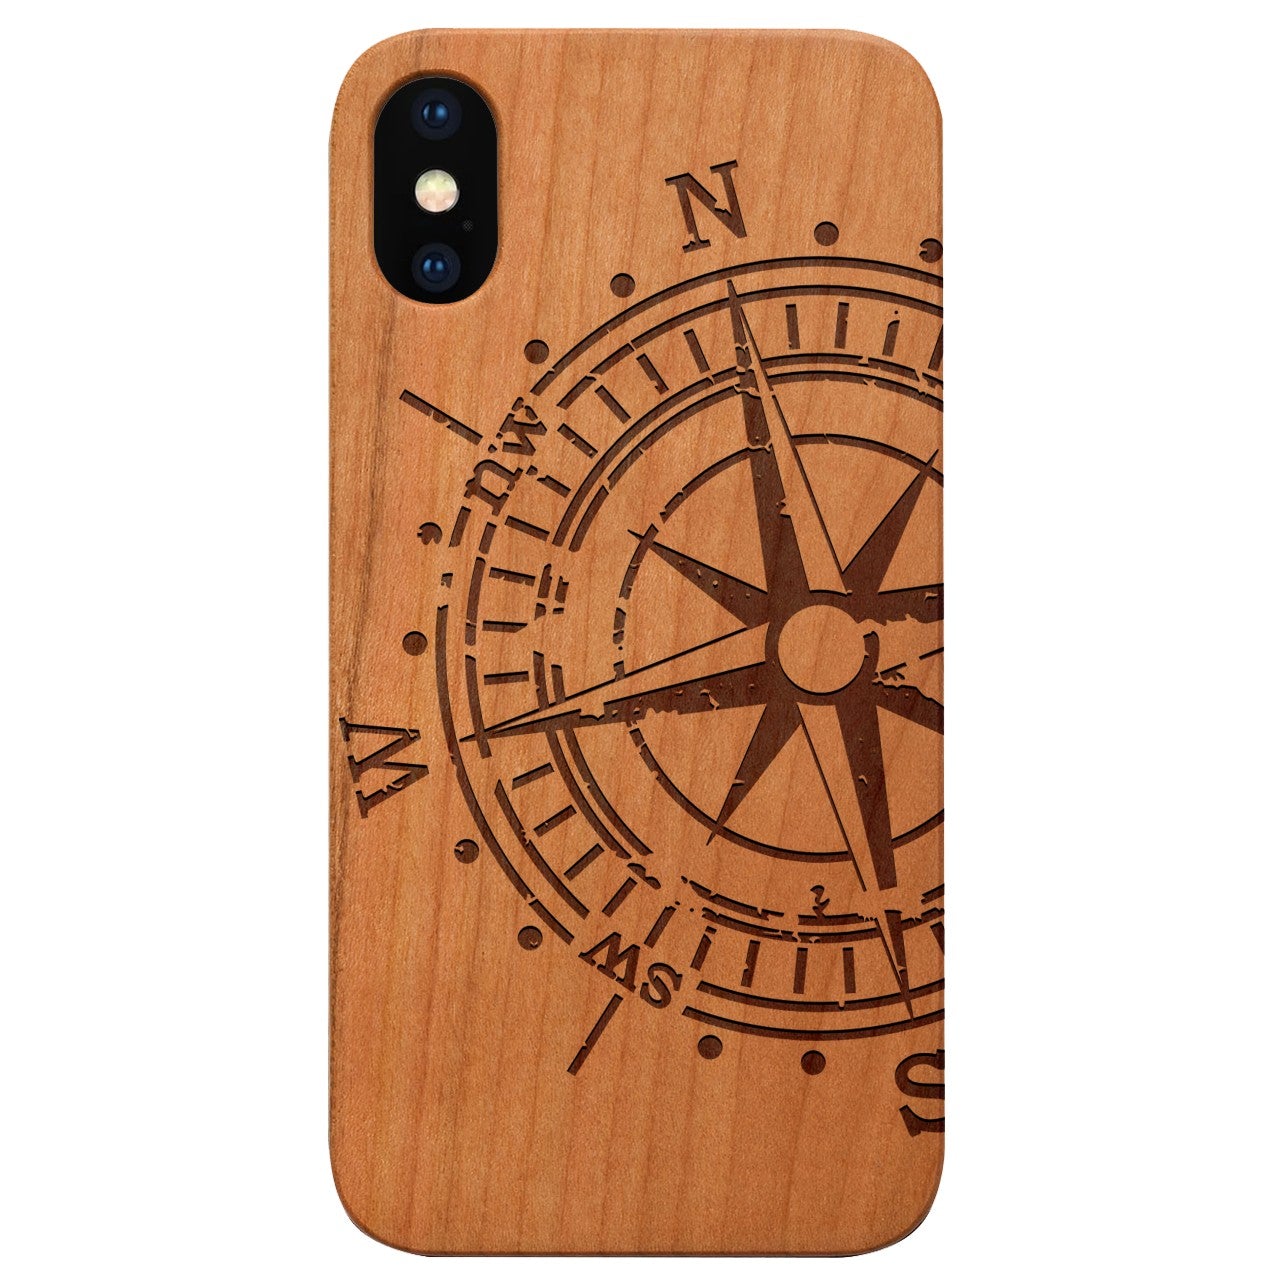  Big Compass - Engraved - Wooden Phone Case - IPhone 13 Models